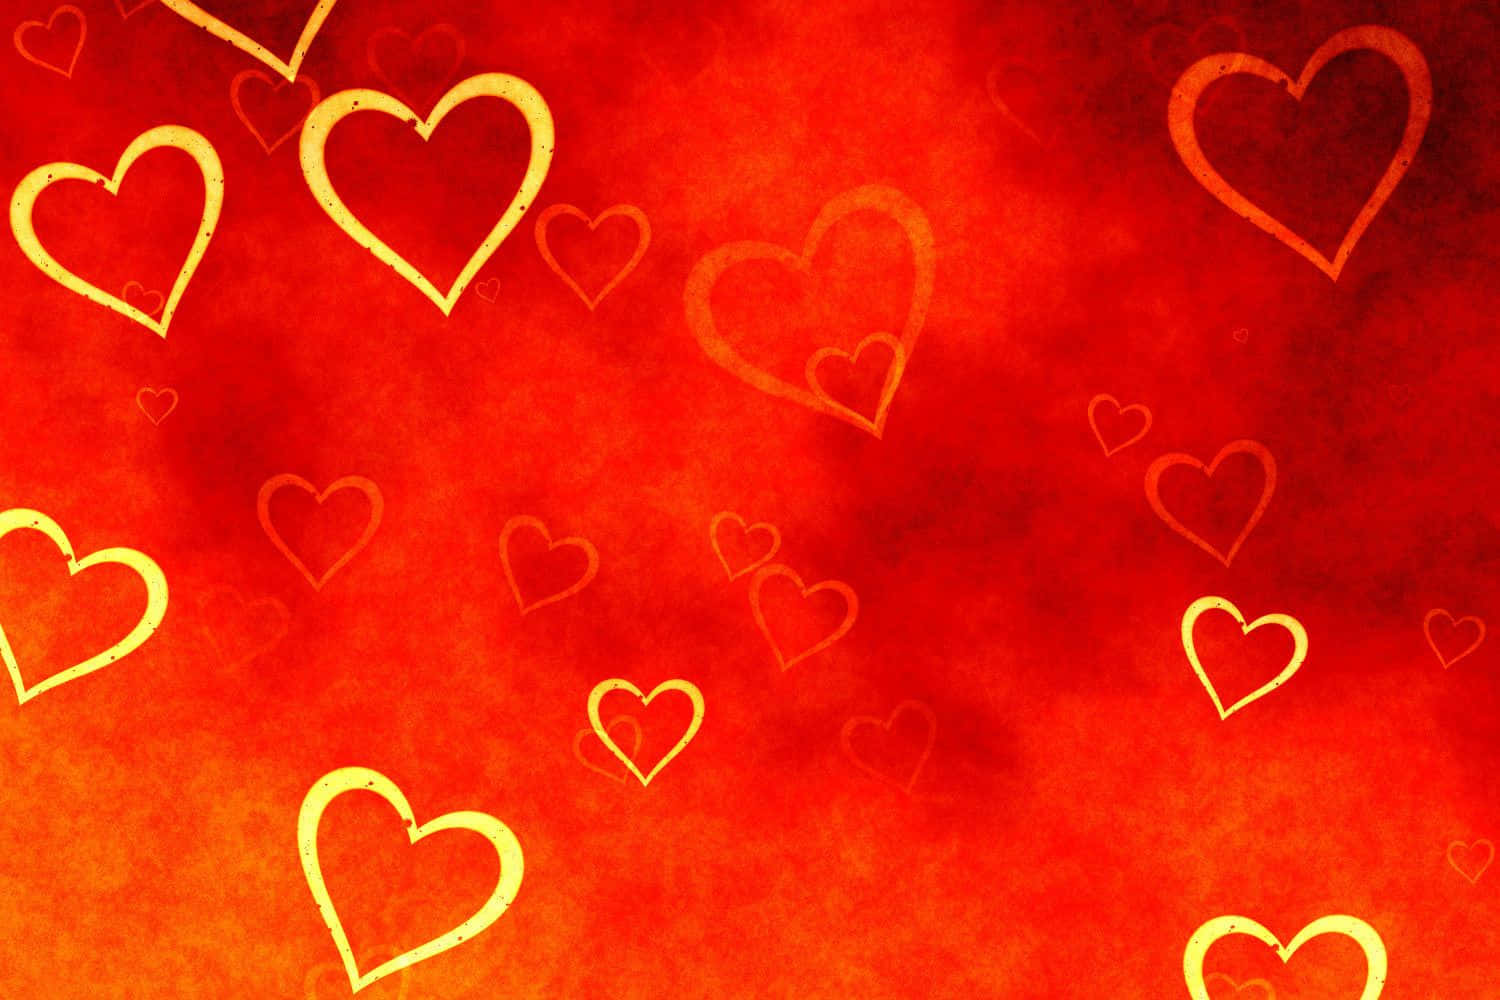 A symbol of love: beautiful and captivating red heart. Wallpaper